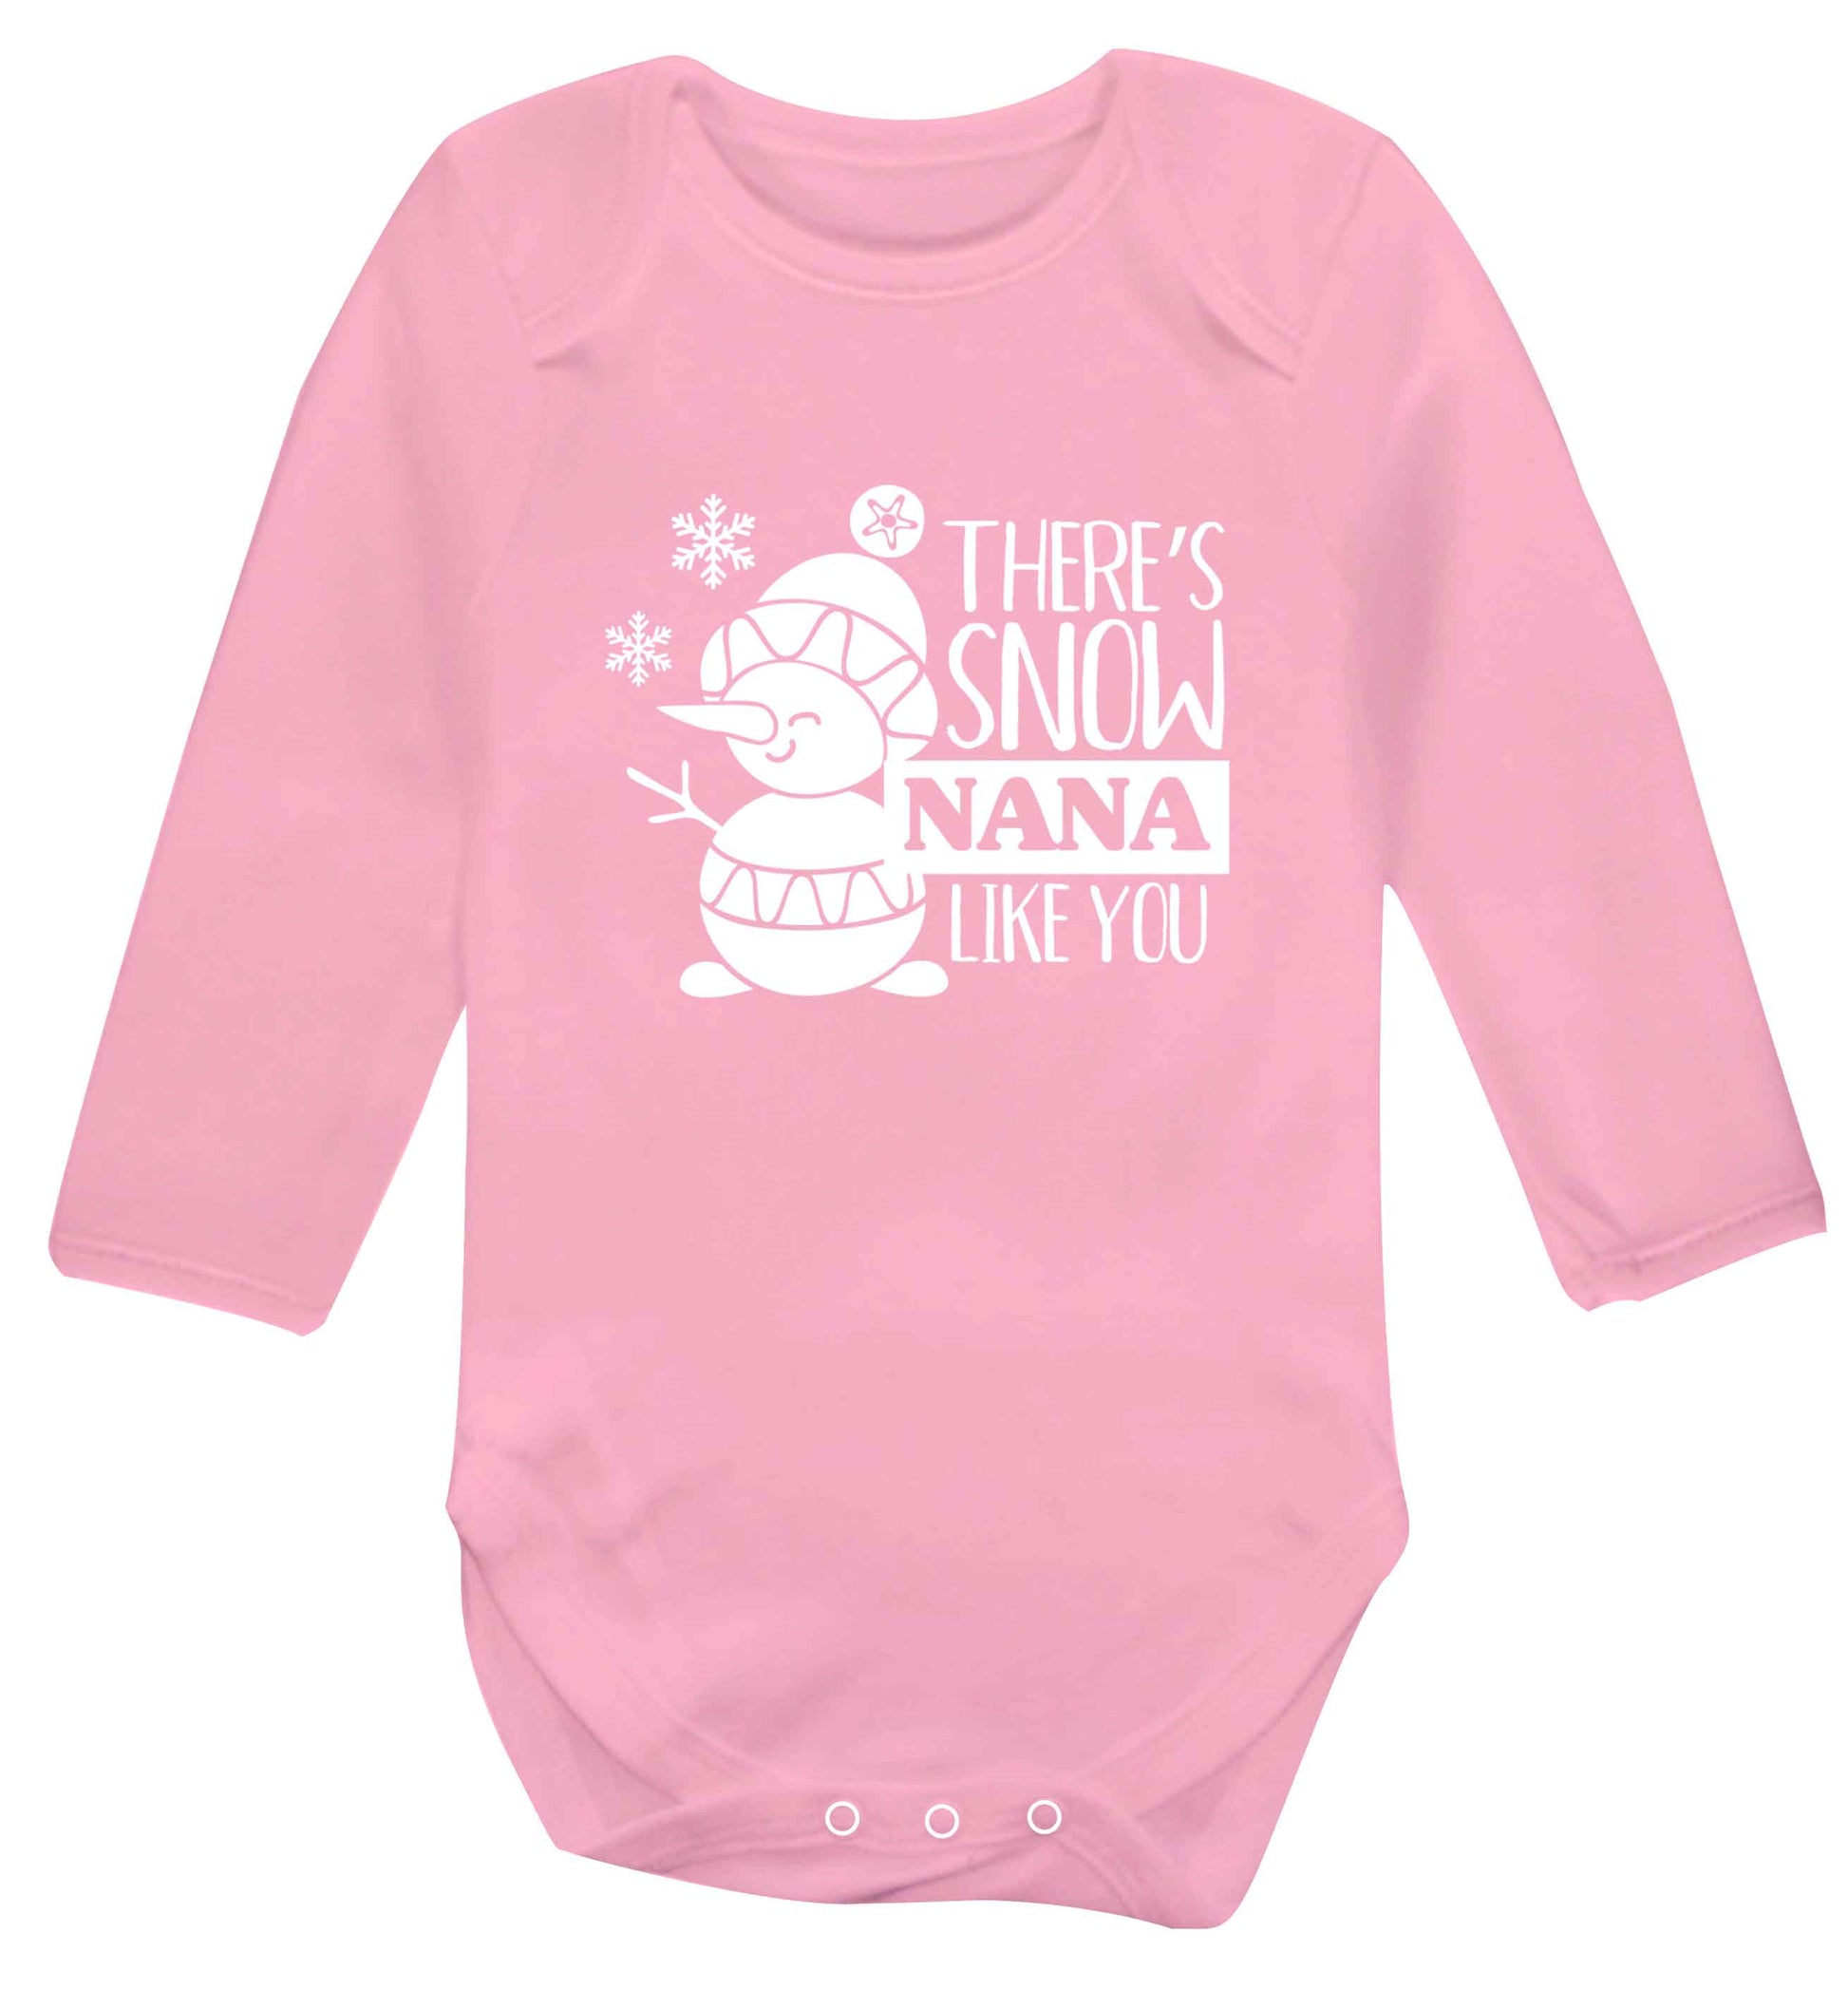 There's snow nana like you baby vest long sleeved pale pink 6-12 months